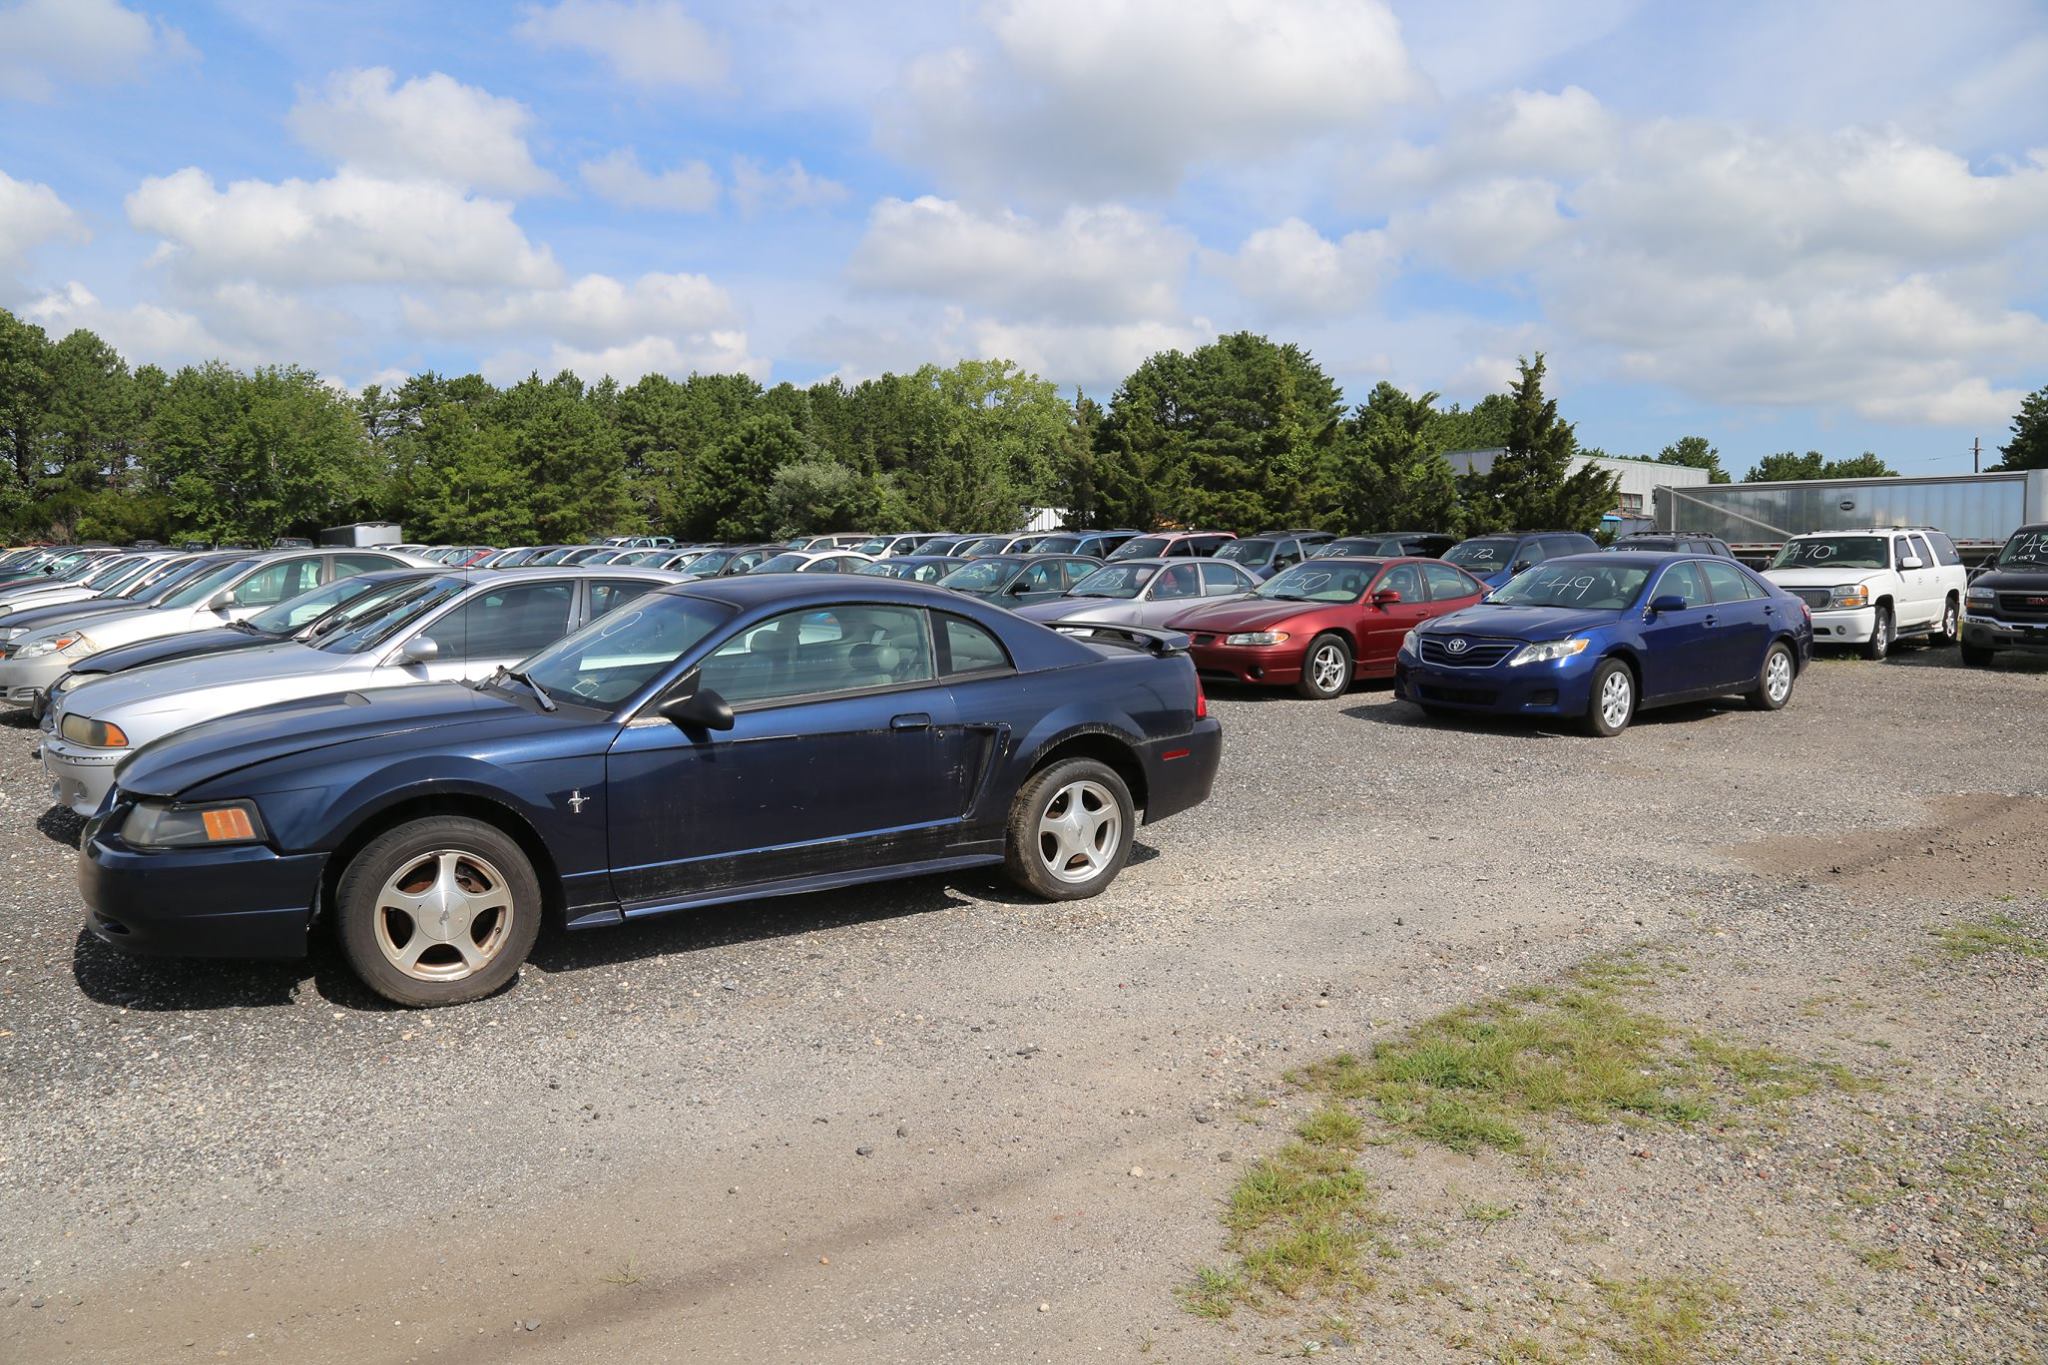 Suffolk County Police Rev Up for Vehicle Auction - Score Your